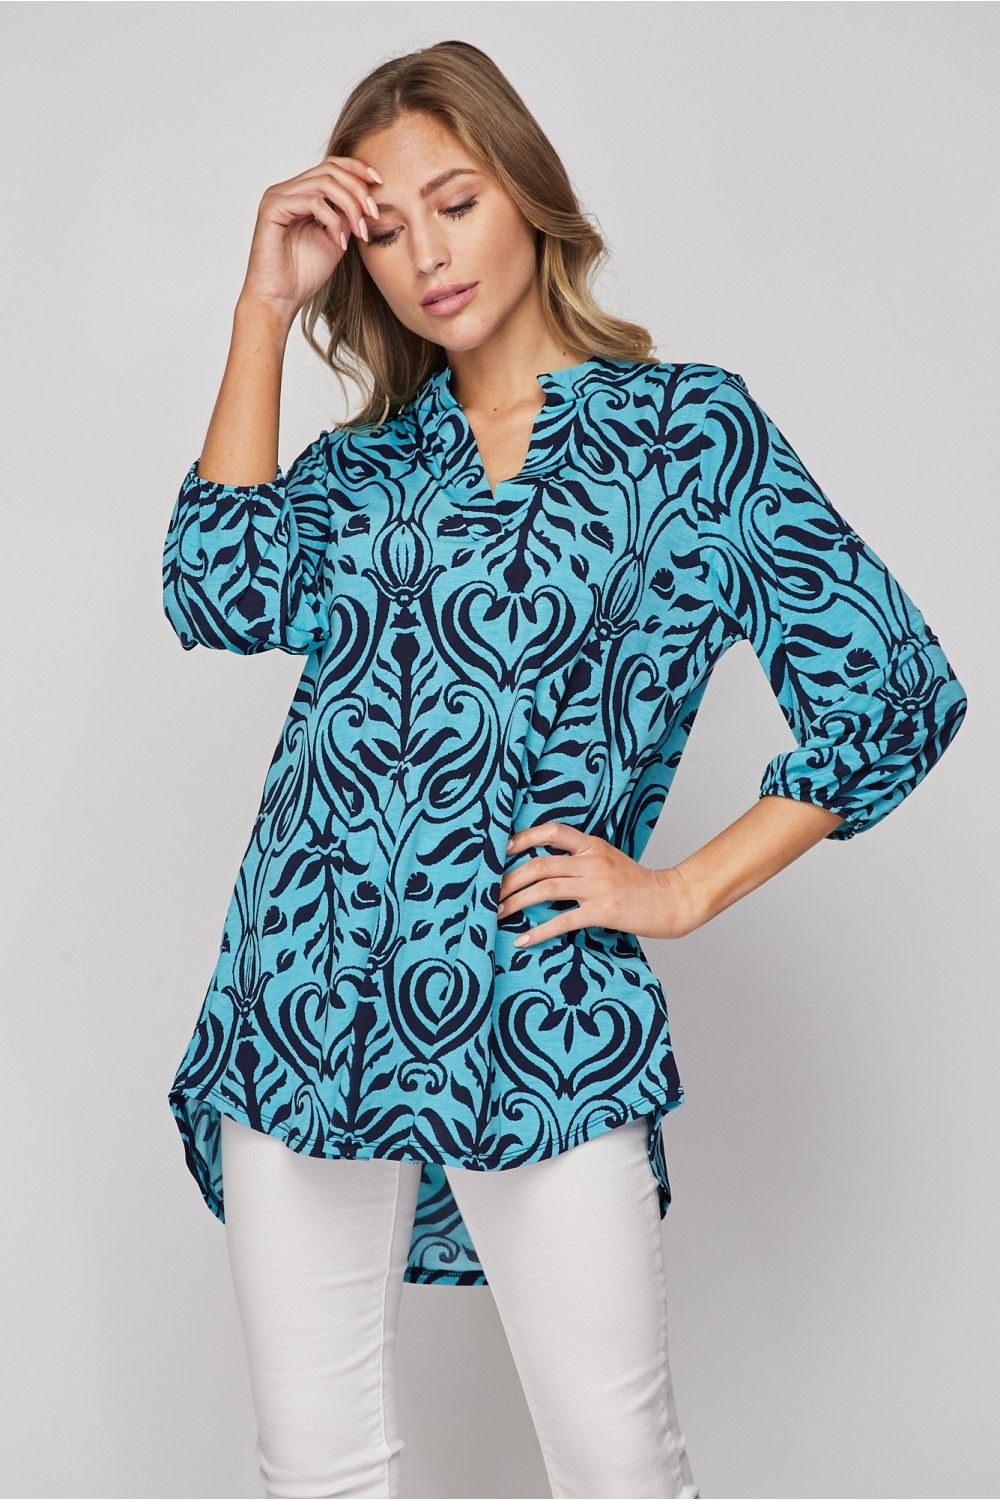 Honeyme Blouse Top with 3/4 Sleeves - Turquoise and Navy